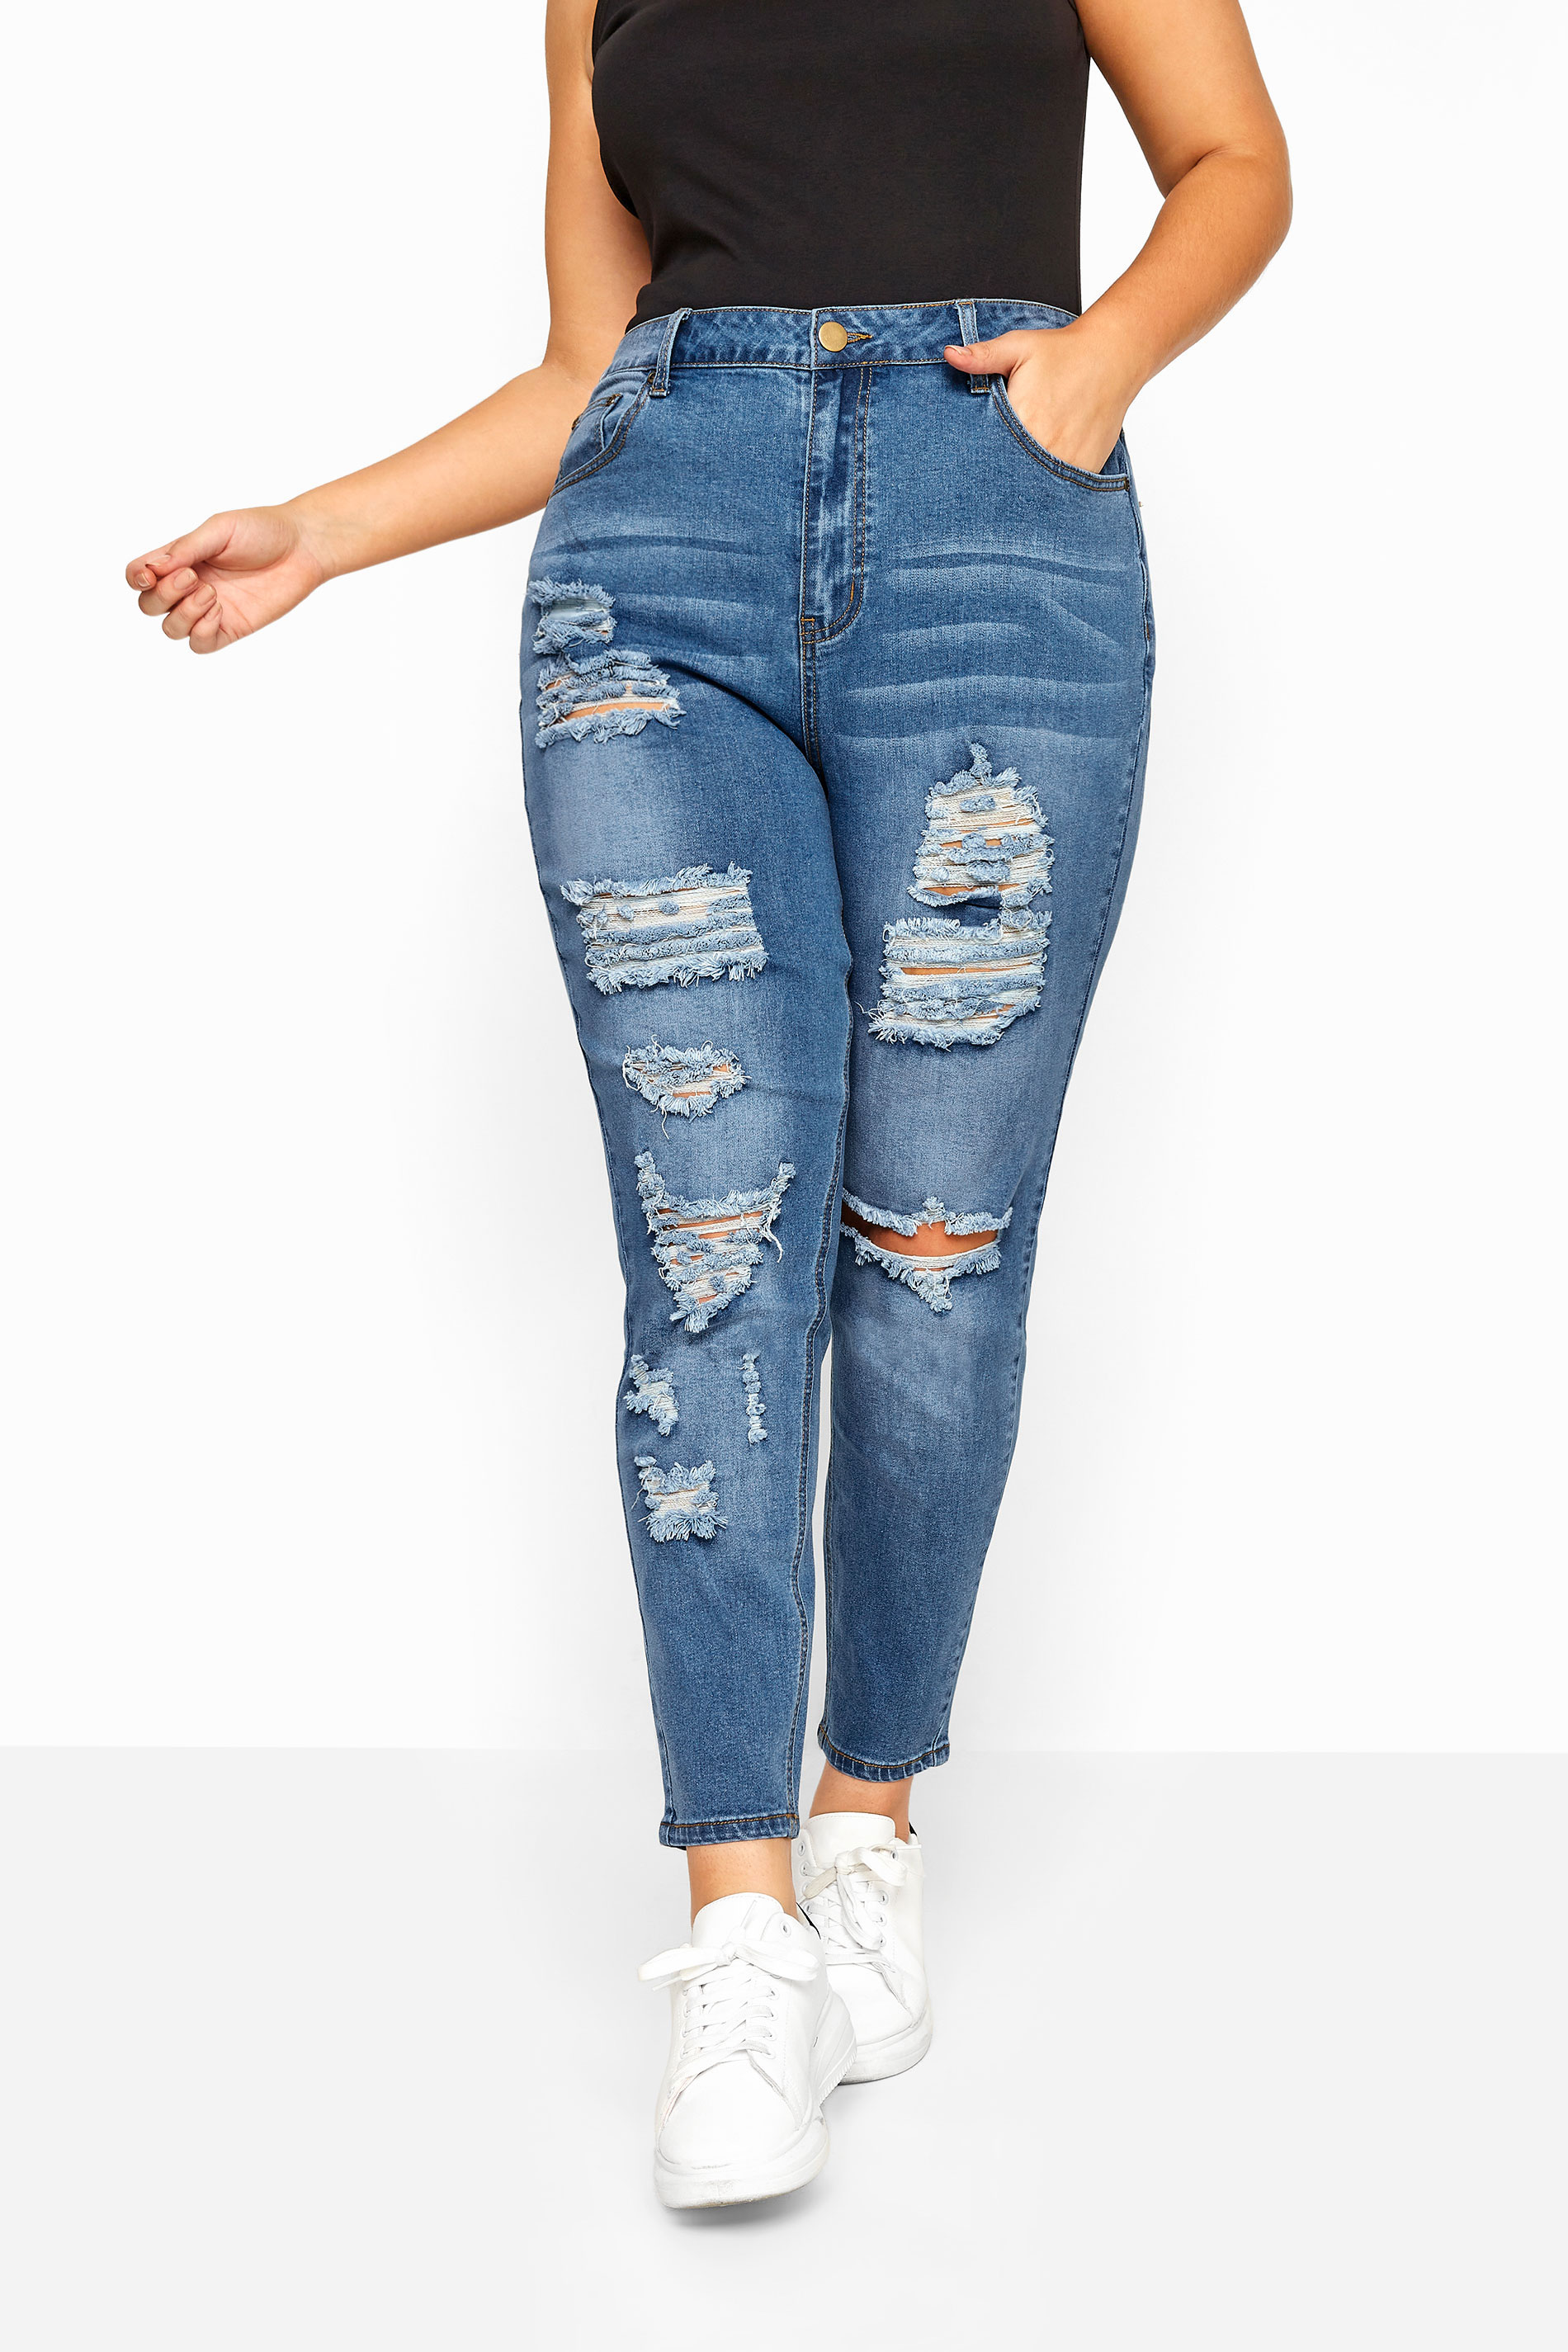 Imagination Pathological how to use Blue Extreme Distressed Ripped Skinny Stretch AVA Jeans | Yours Clothing